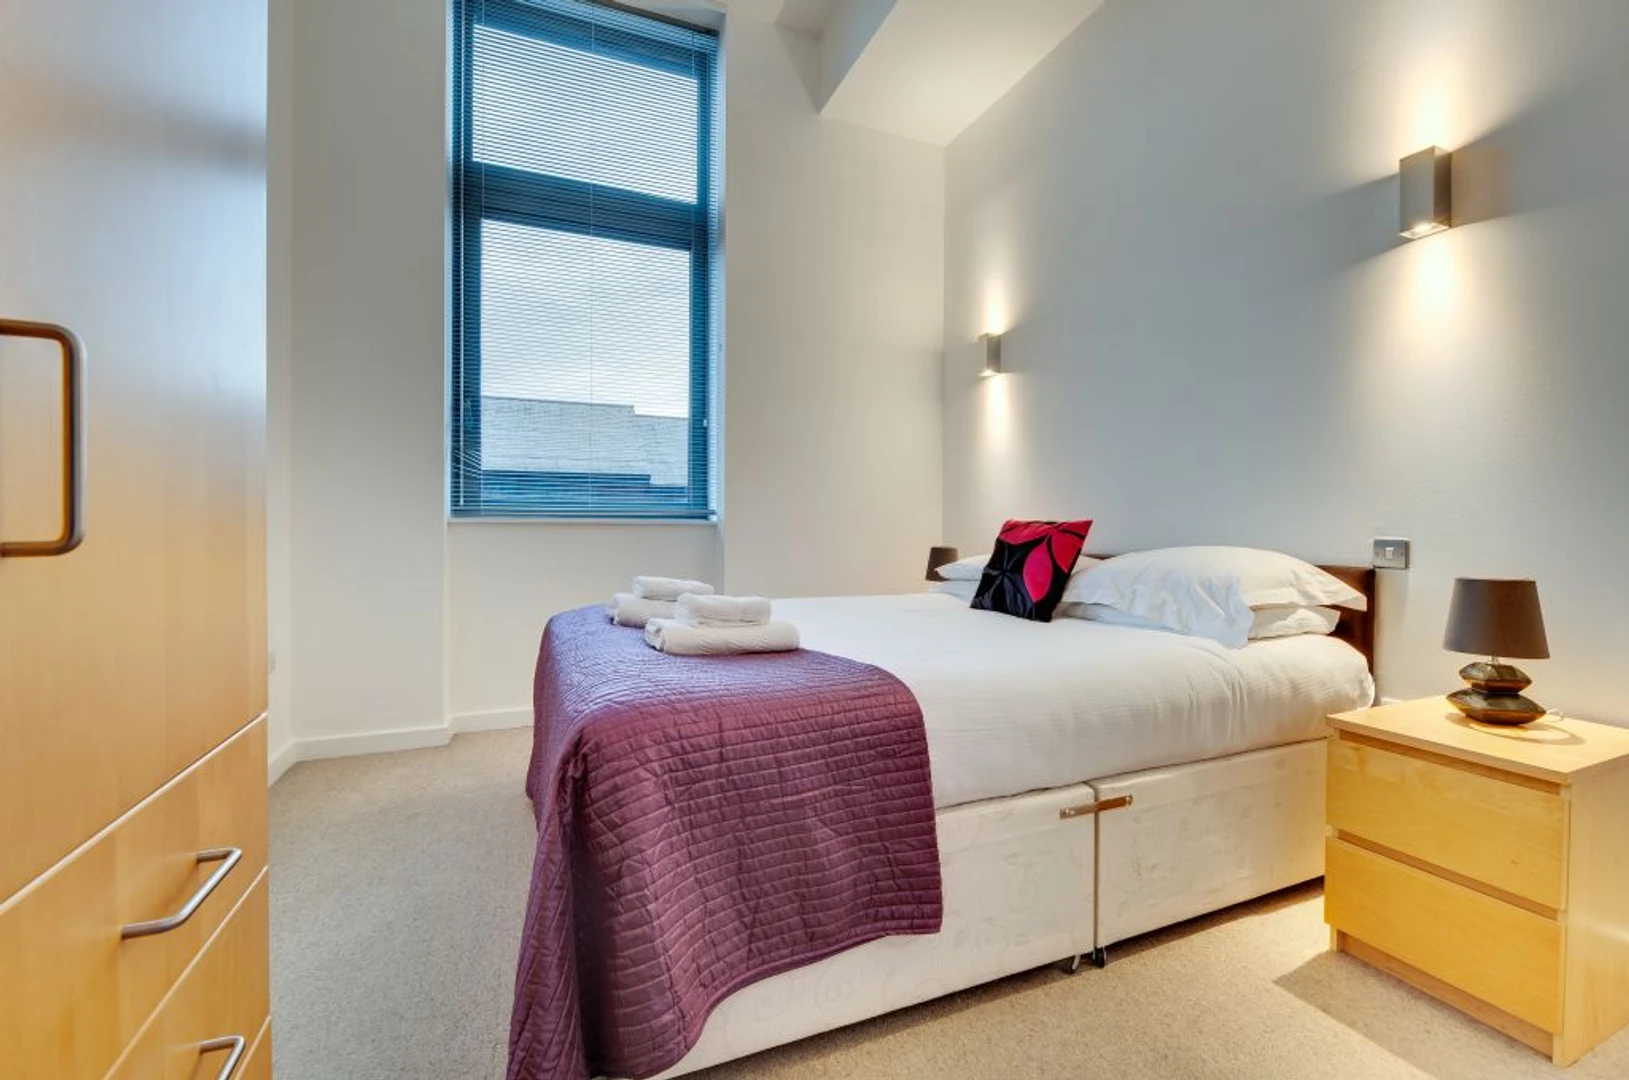 Accommodation in the centre of Newcastle Upon Tyne